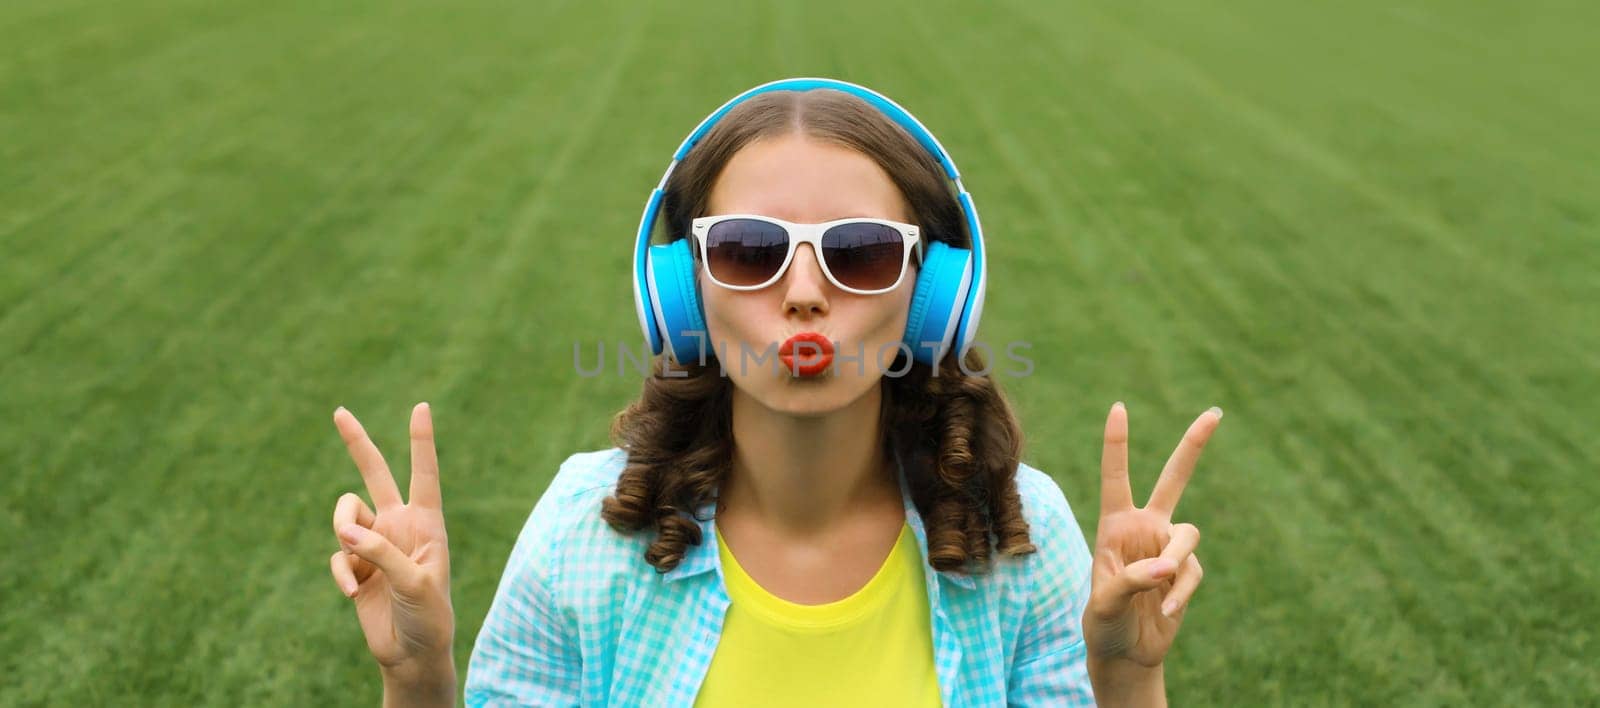 Portrait of happy smiling young woman listening to music in headphones blowing kiss while sitting on grass in summer park